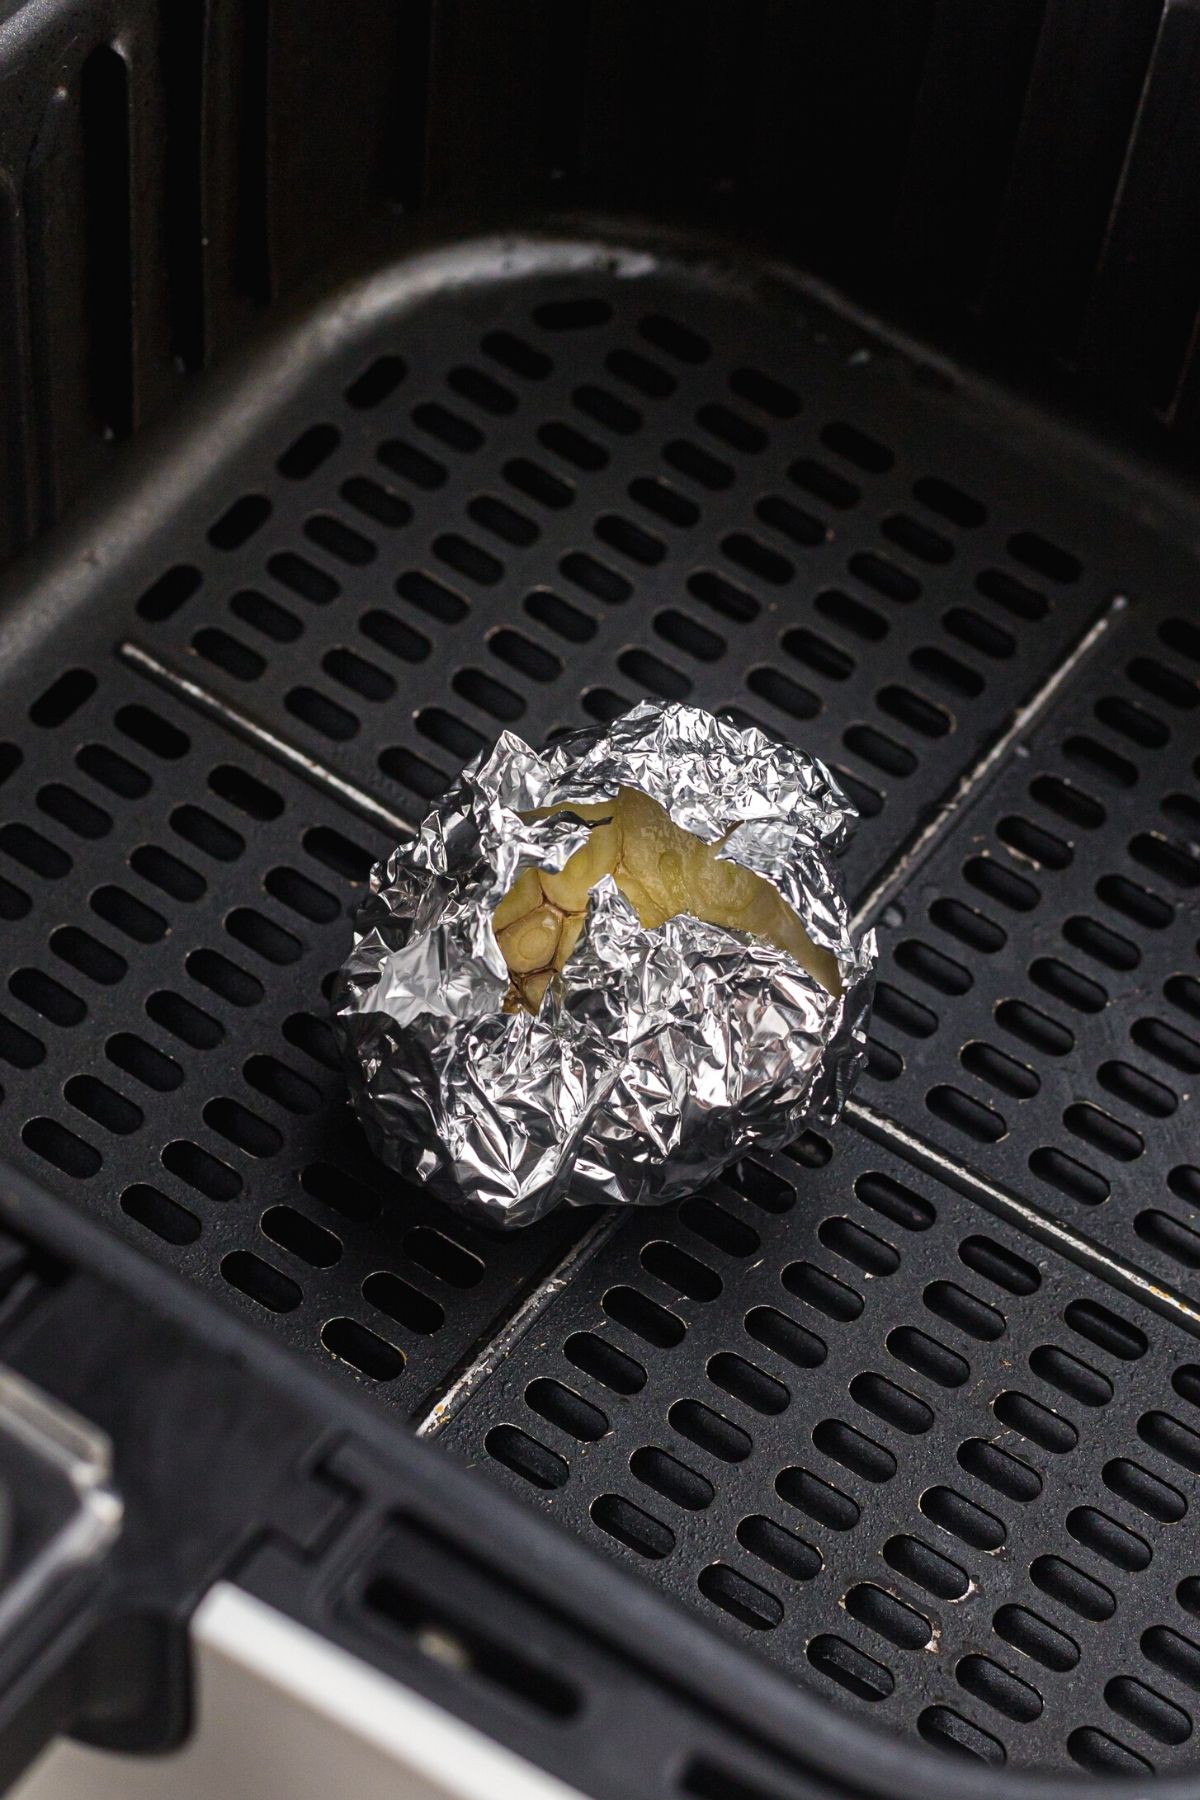 Bulb of garlic wrapped in foil in the air fryer basket